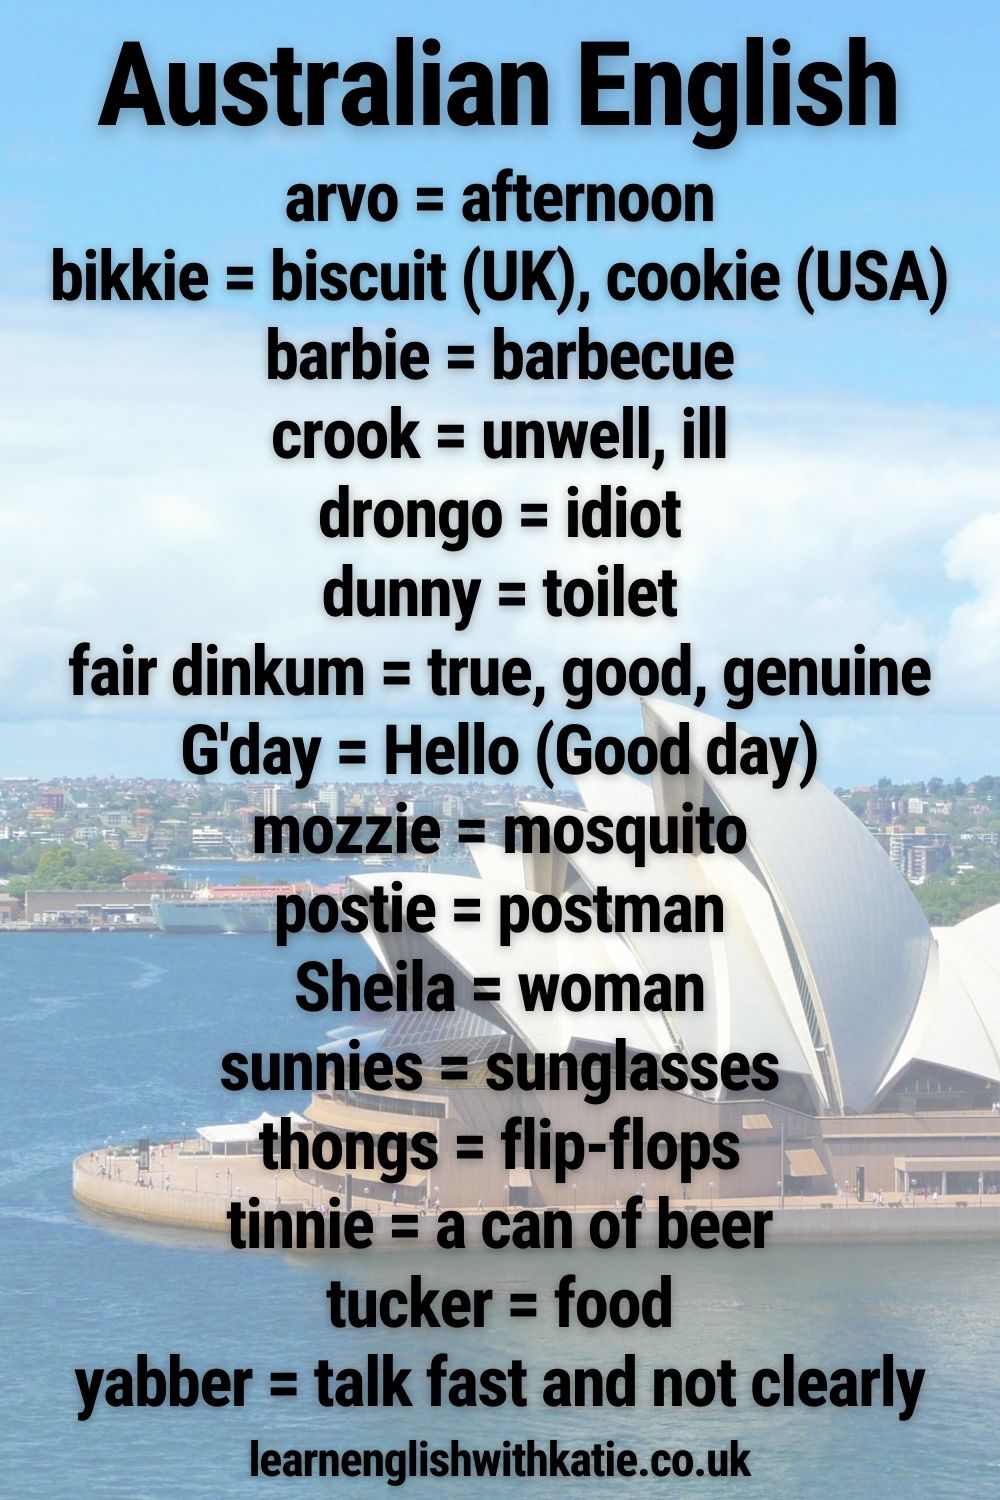 Pinterest pin showing a list of Australian English words over an image of the Sydney opera house.